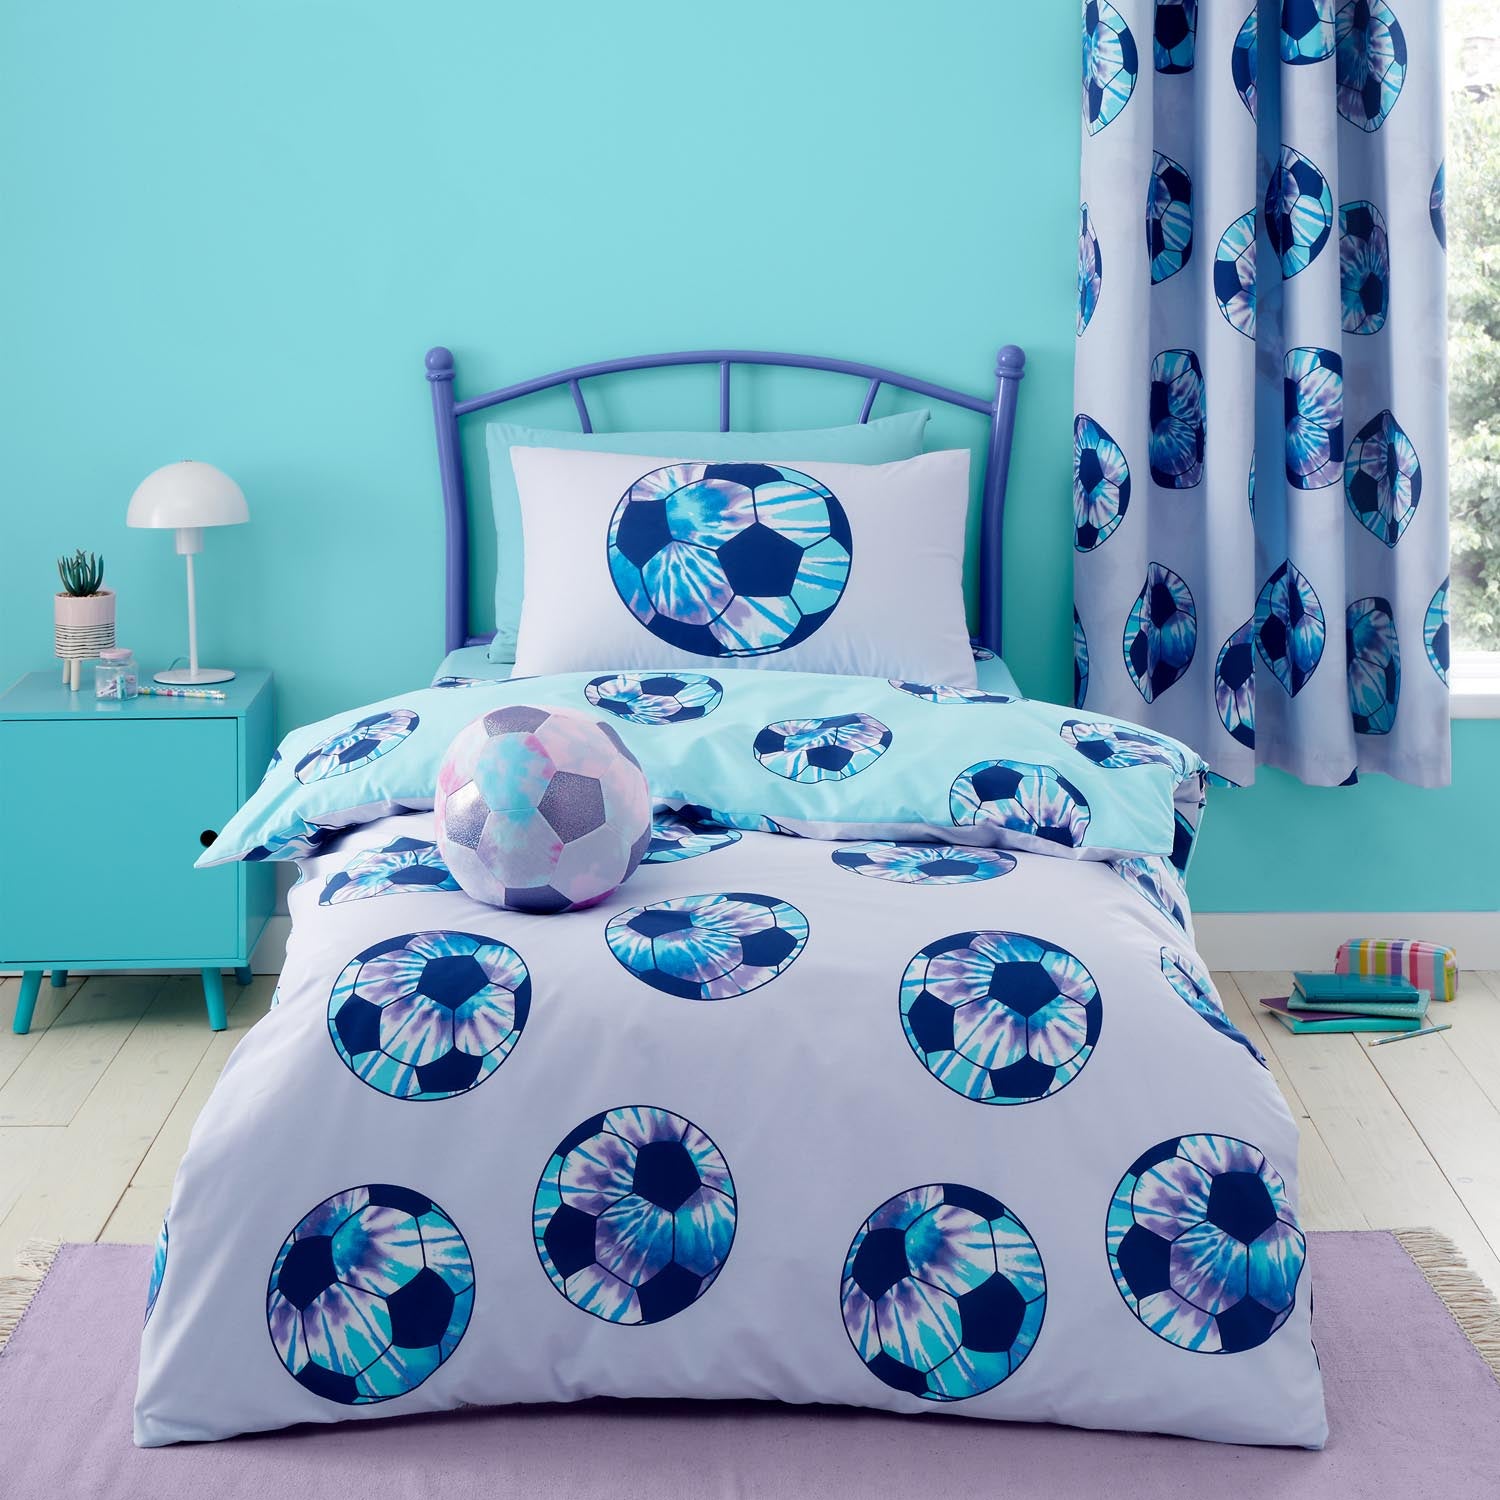 The Home Luxury Collection Tie Dye Football Duvet Cover Set 4 Shaws Department Stores